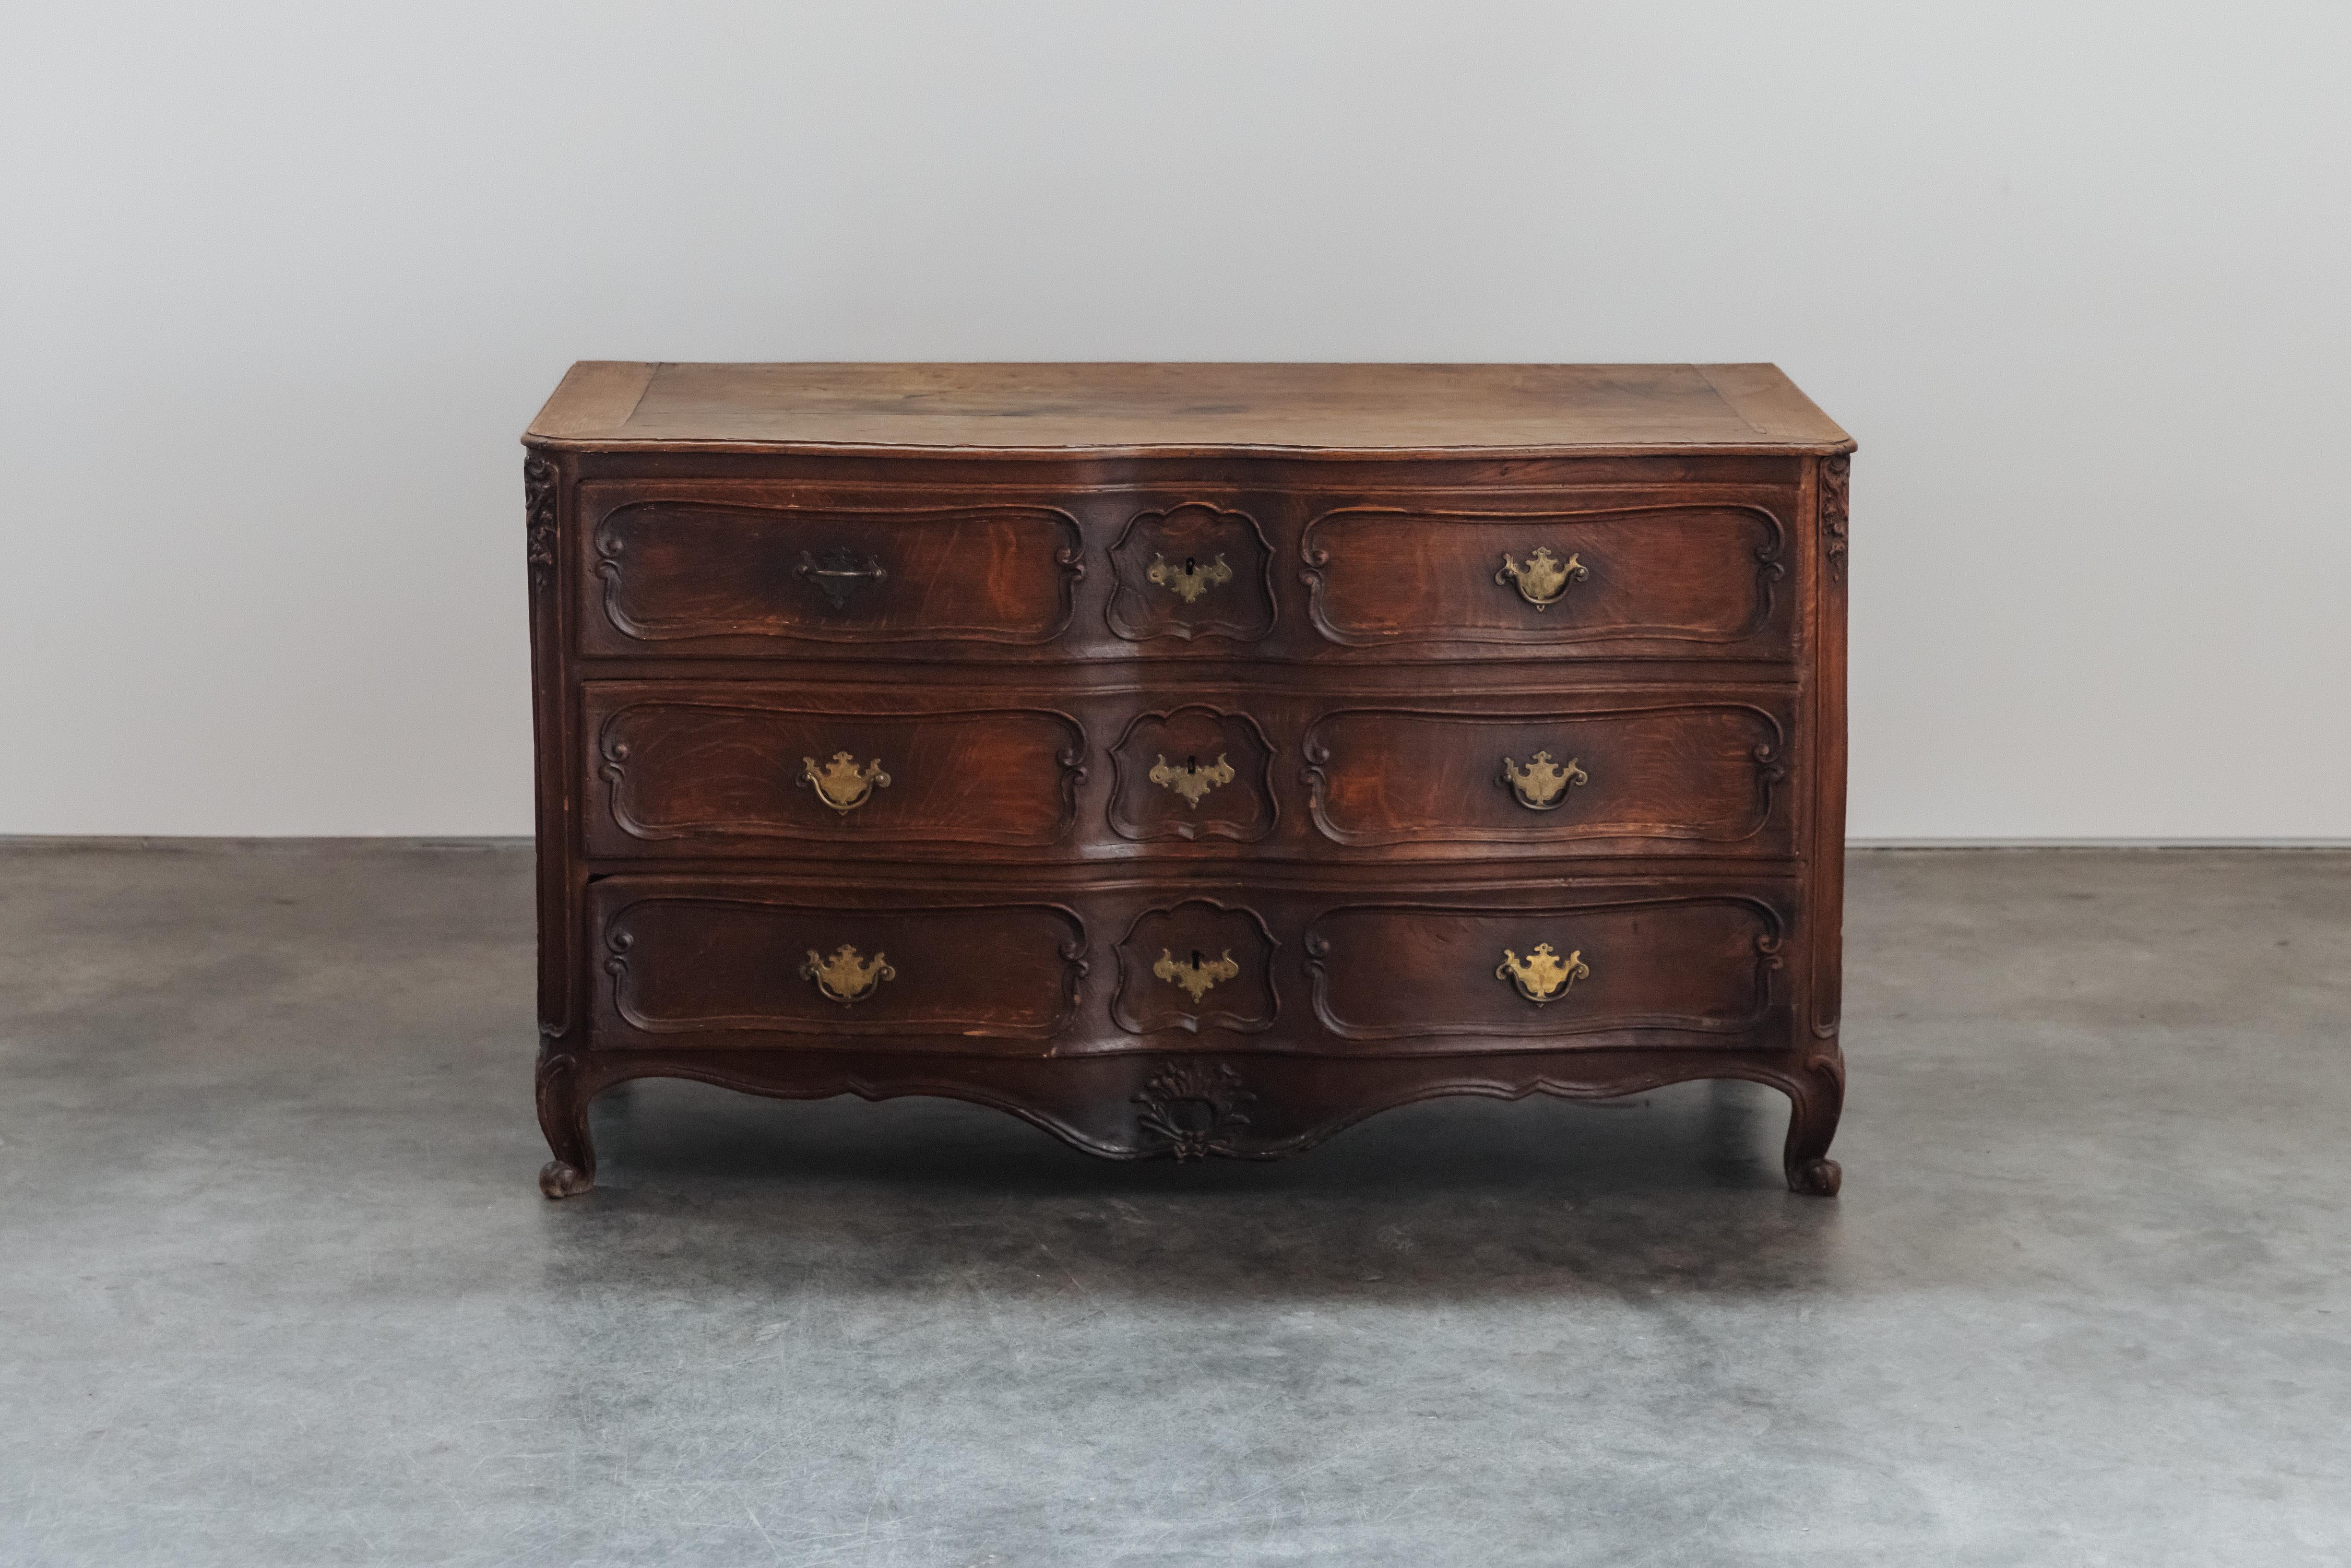 Early Oak Chest From France, Circa 1800.  Solid oak construction with original hardware.  Fantastic patina and use.
